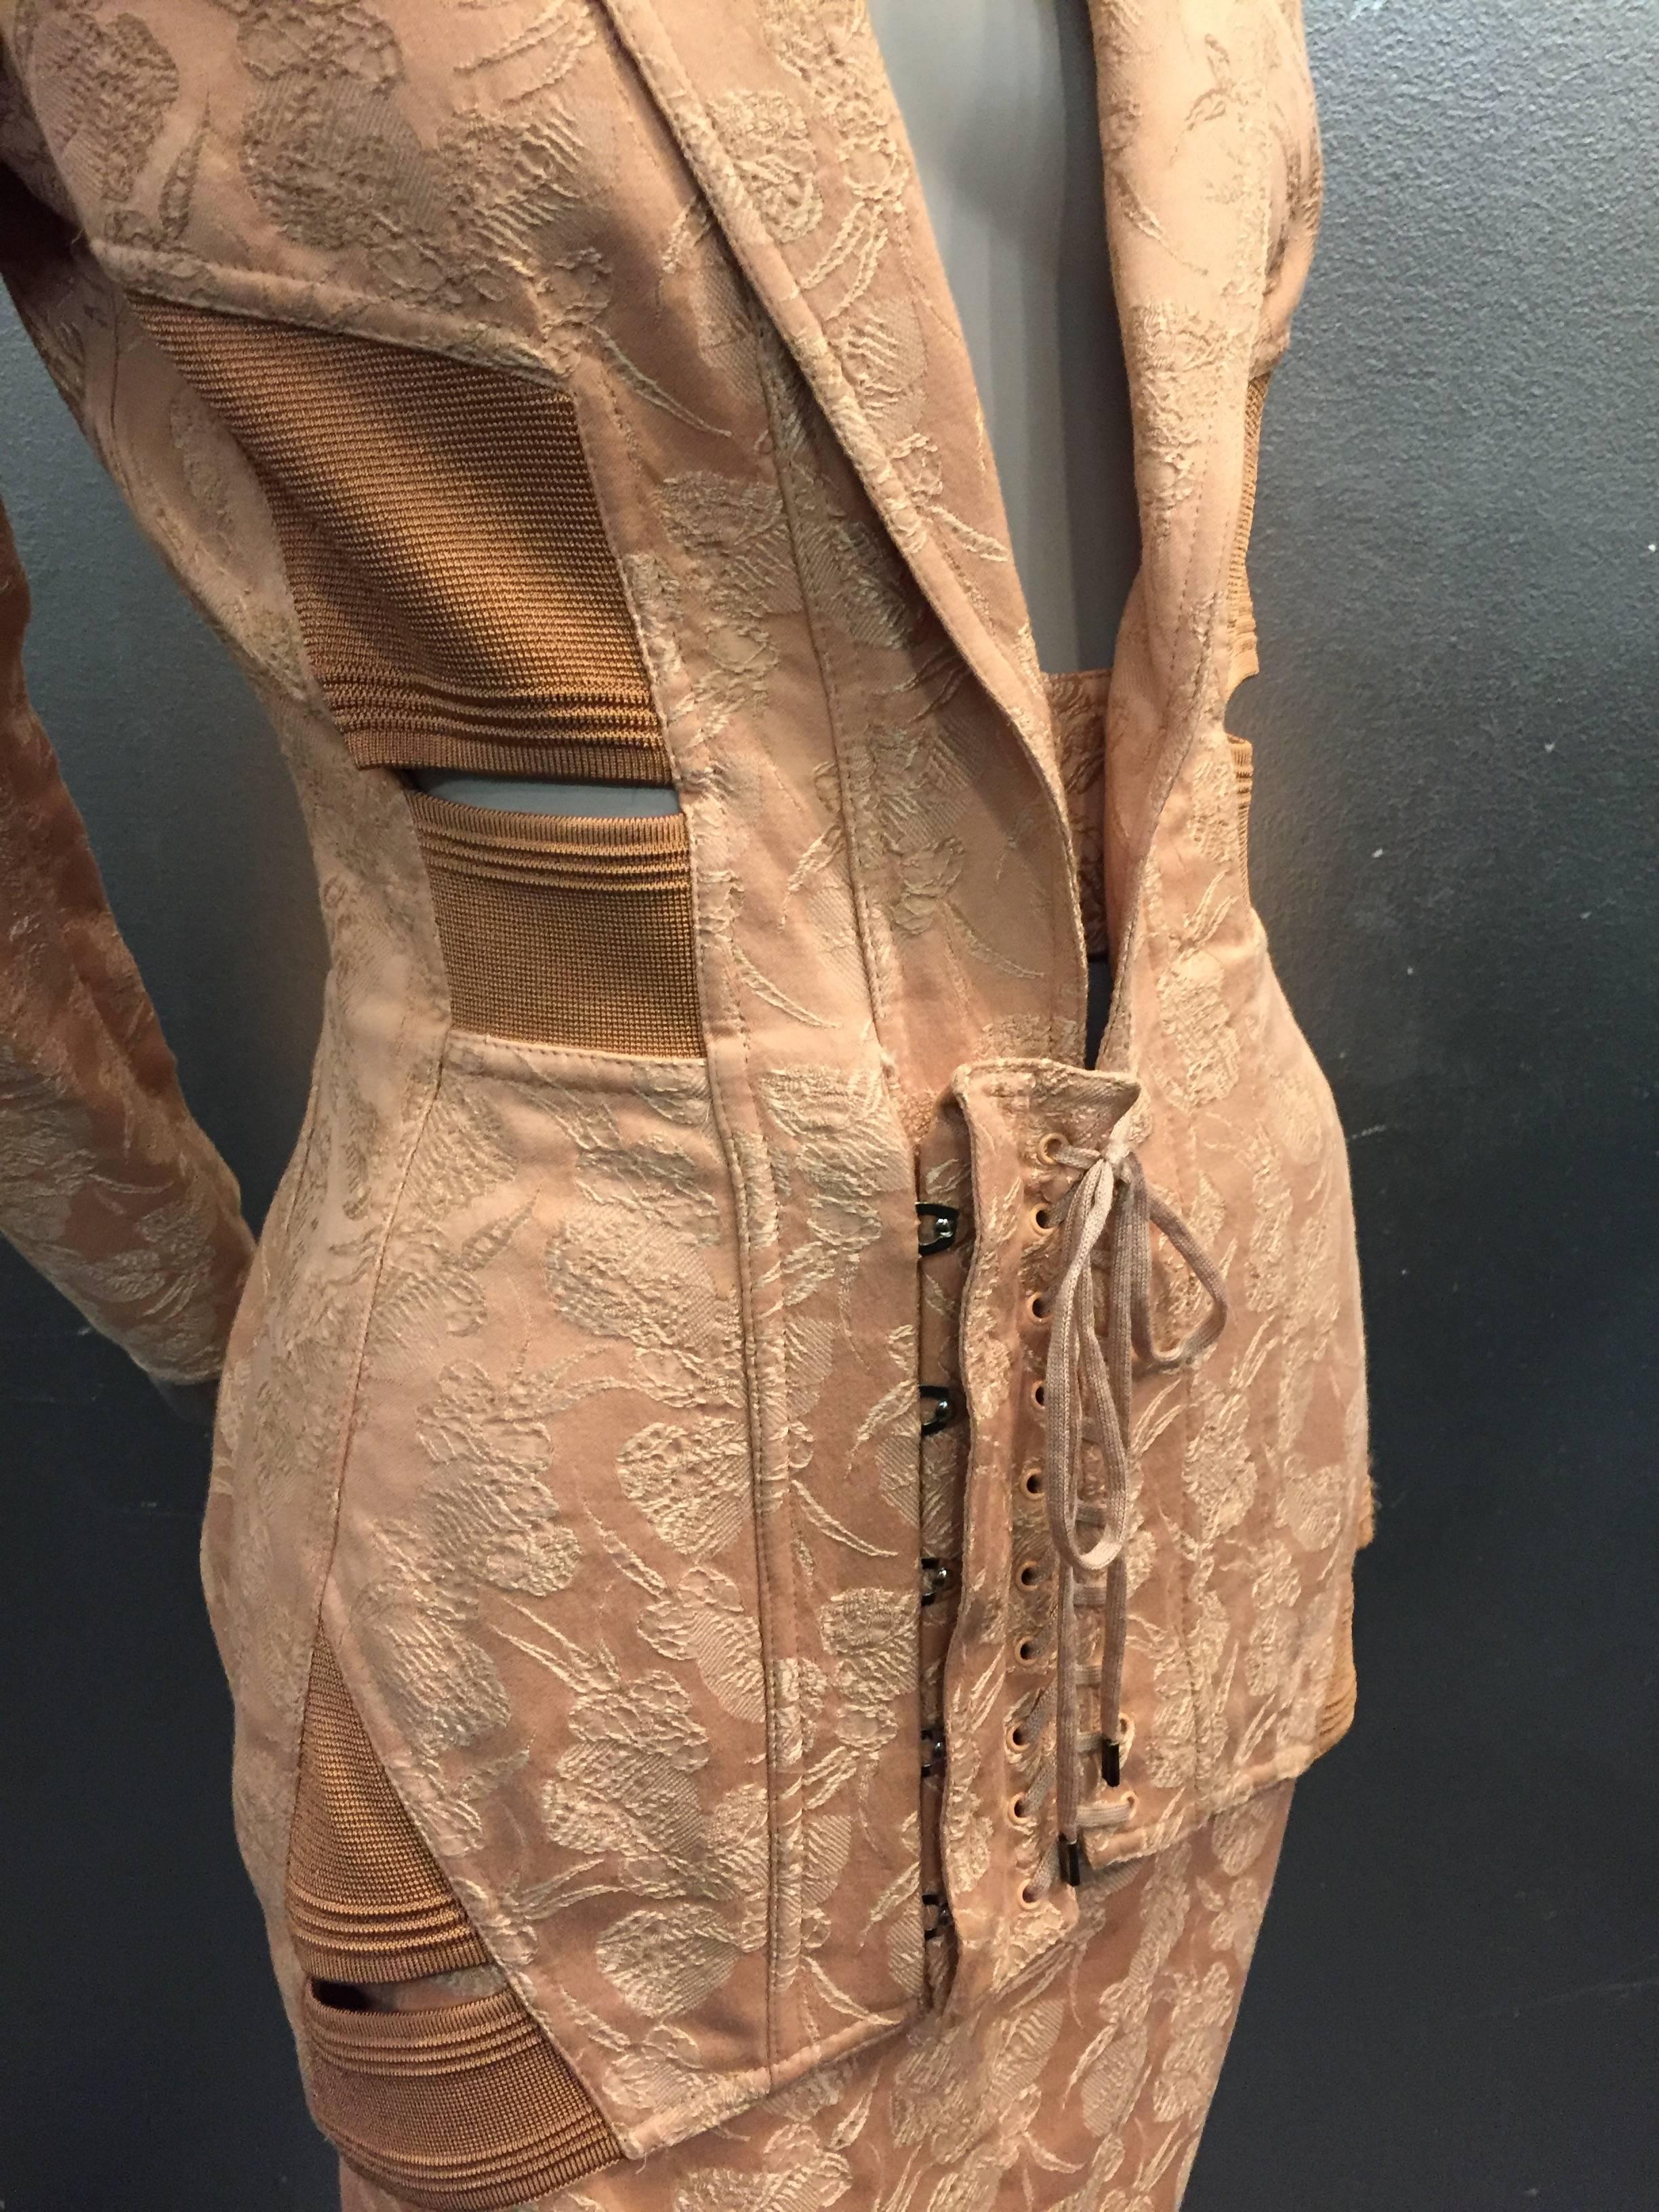 1980s Iconic Jean Paul Gaultier Peach Jacquard Corset-Inspired Skirt Suit 1